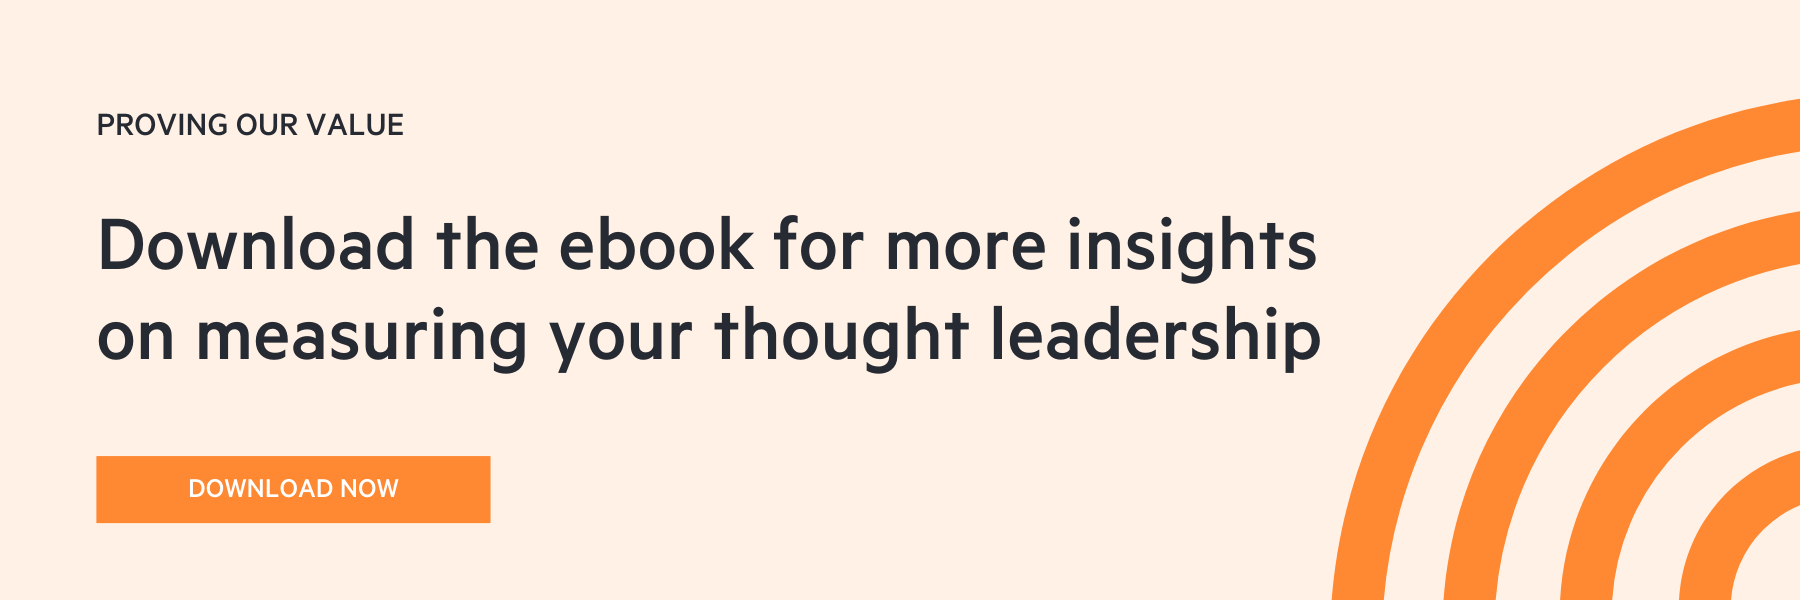 Download the Proving our value ebook for more insights on measuring your thought leadership.